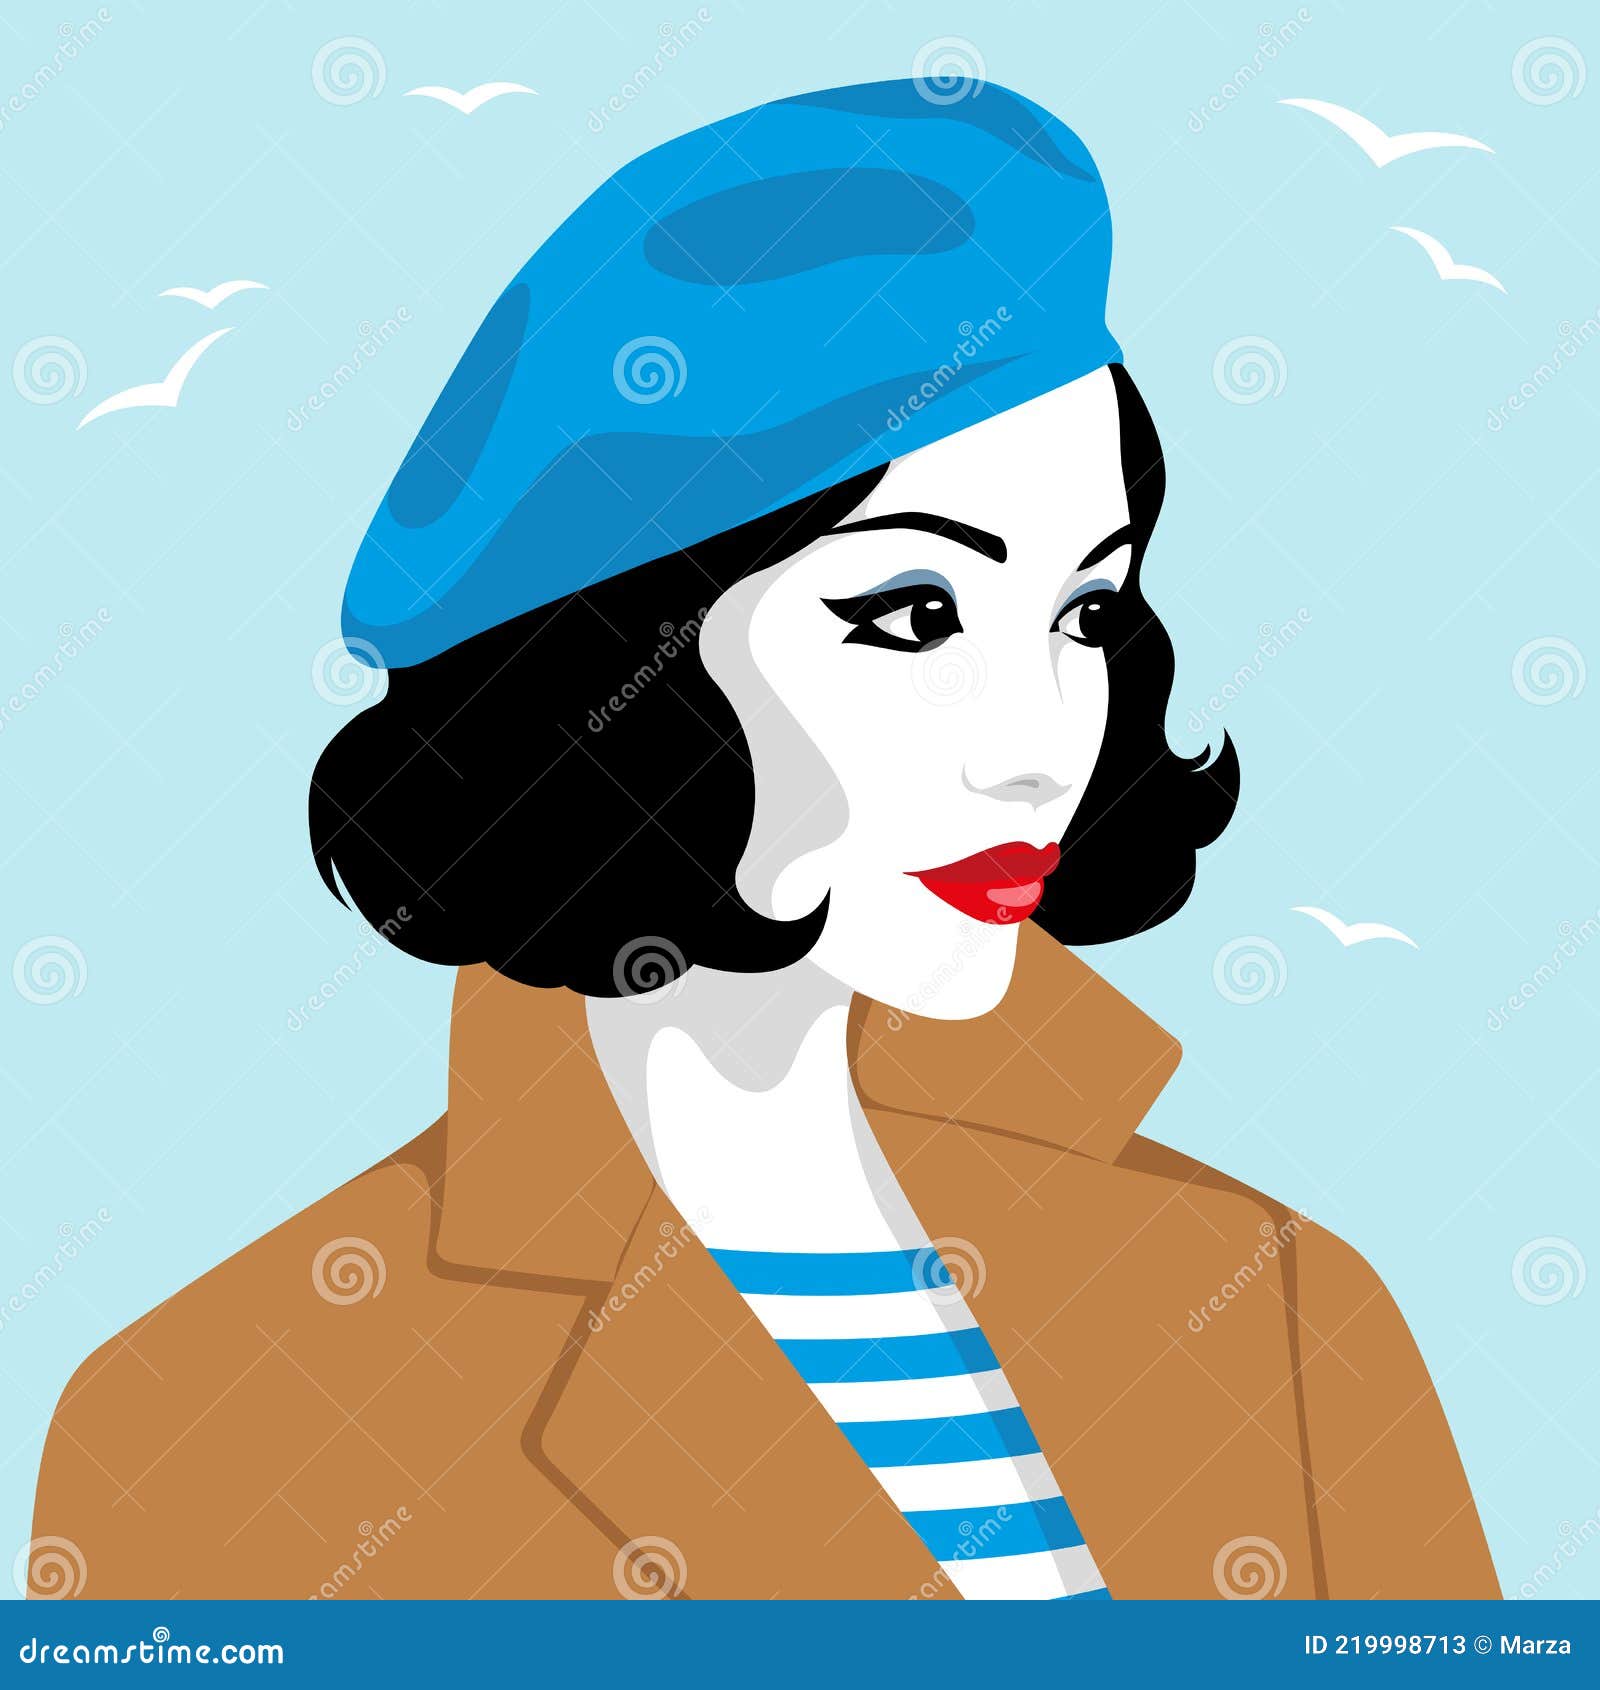 How to Wear a Beret With Confidence